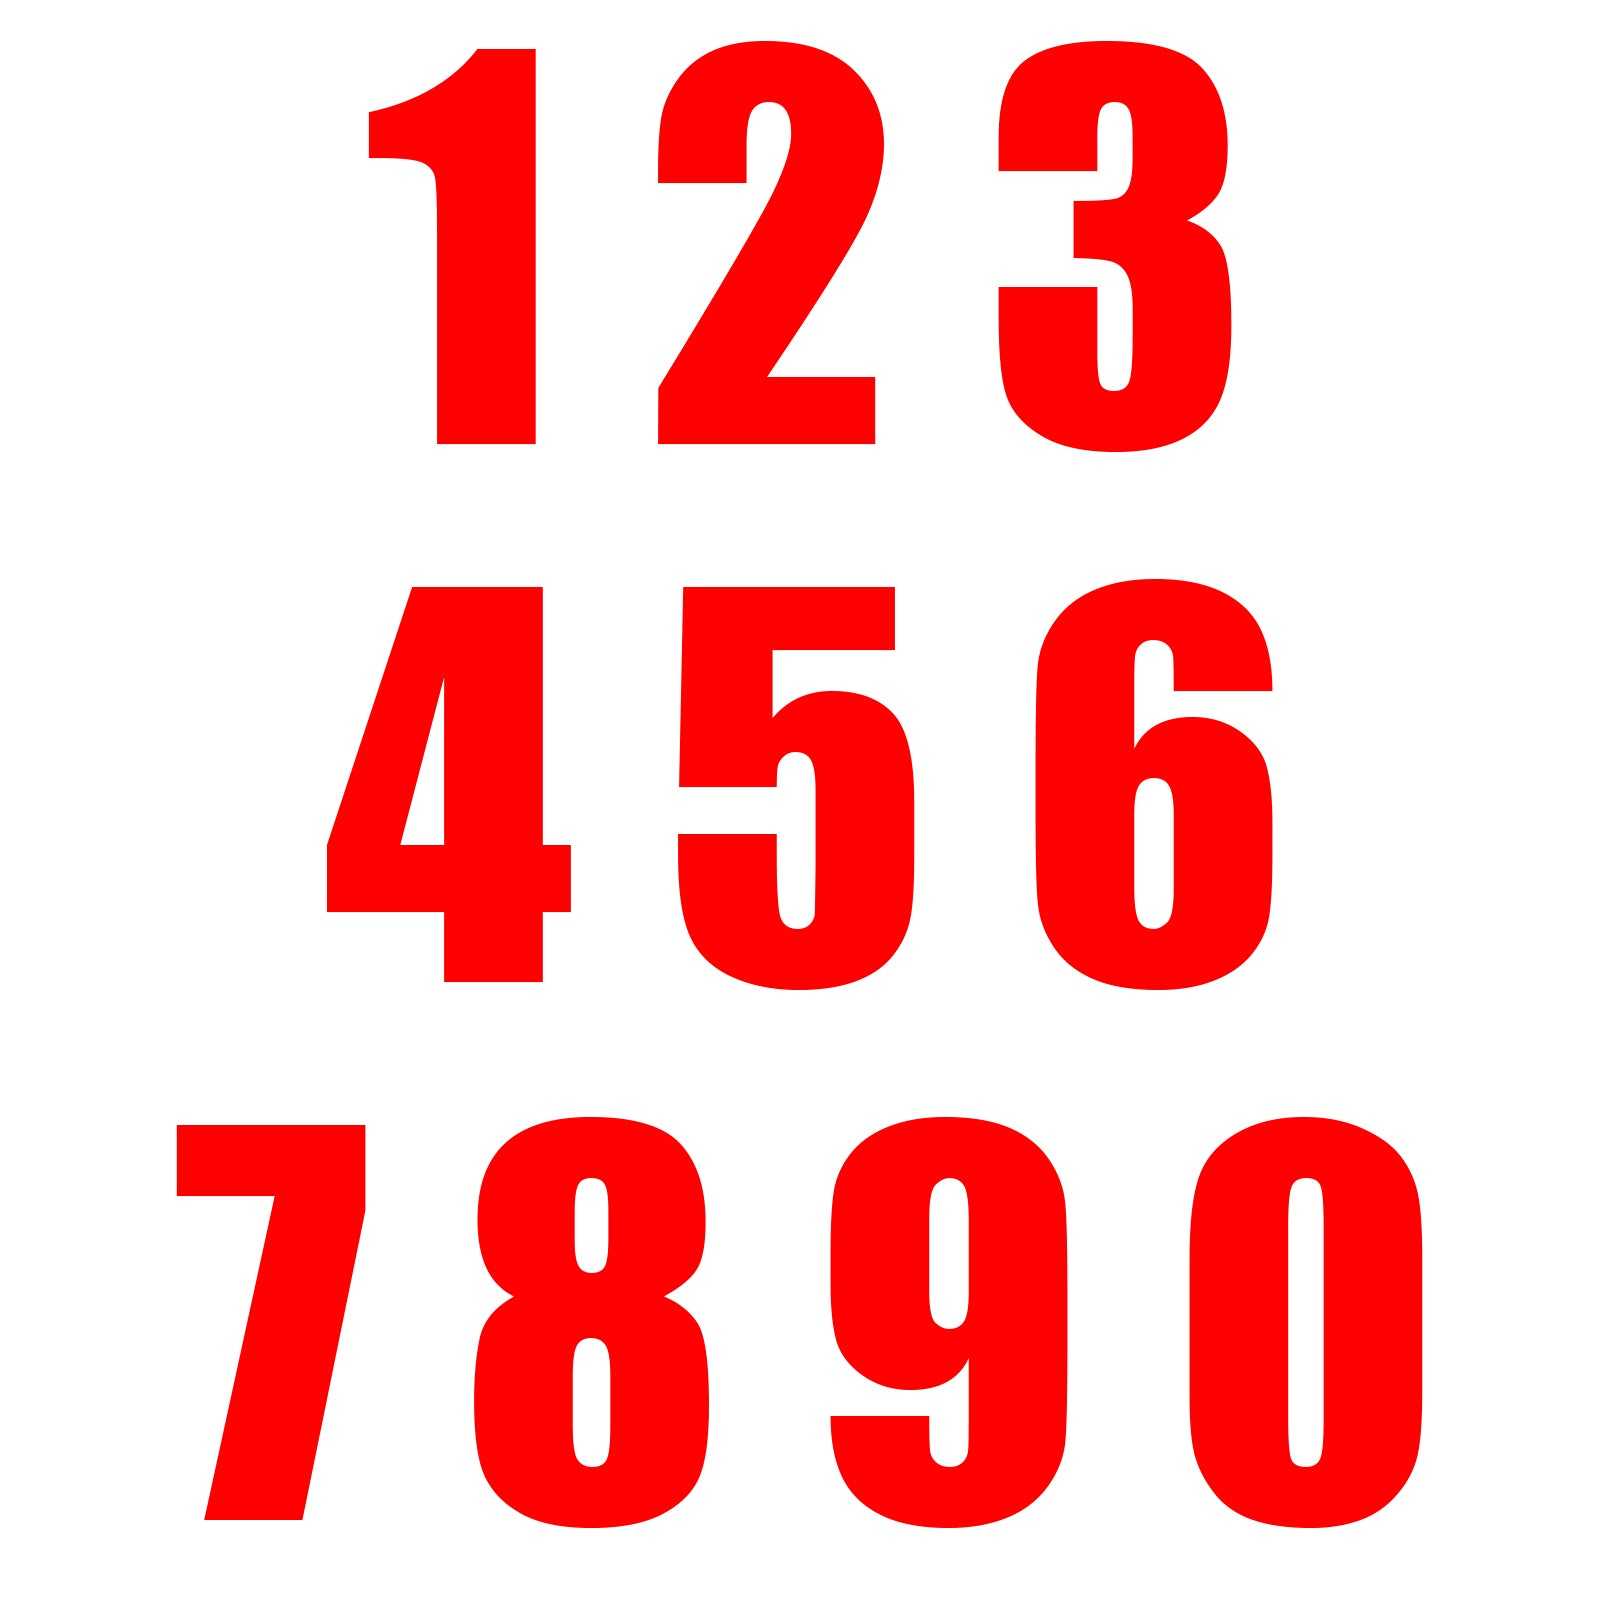 Whites Motorcycle Parts, Whites Race Number - Red #2 (10 Pack)